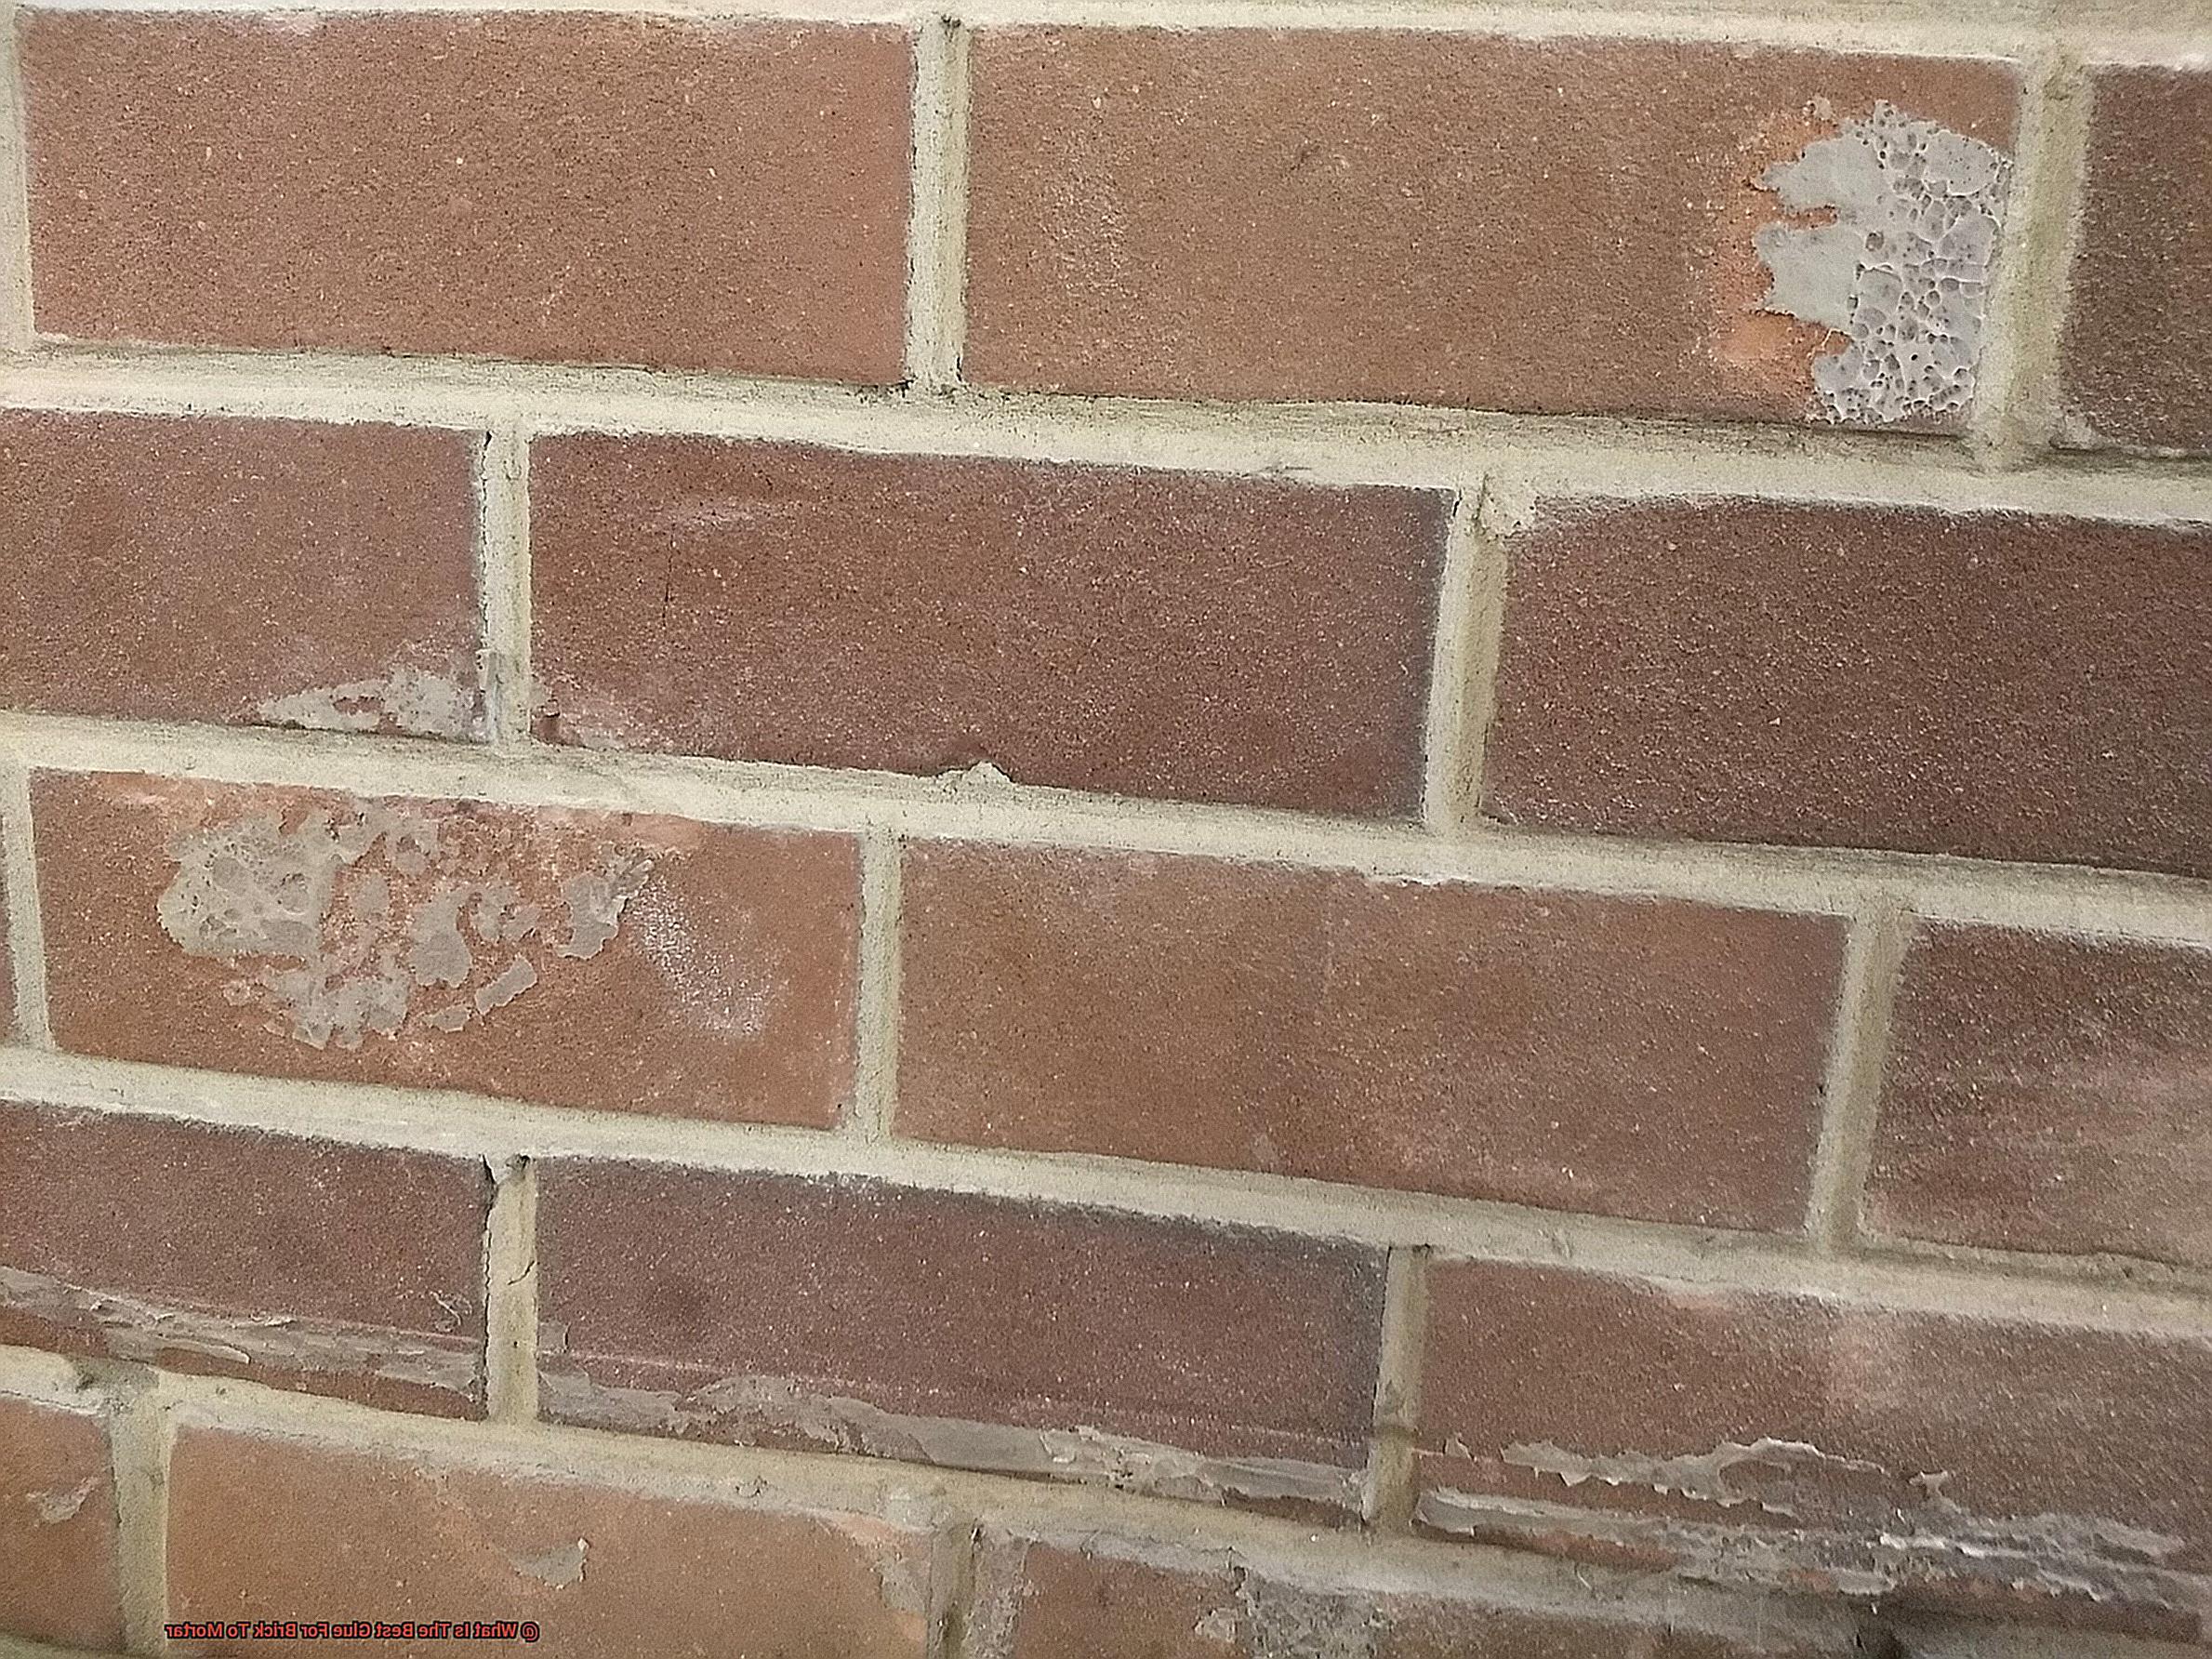 What Is The Best Glue For Brick To Mortar? - Glue Things